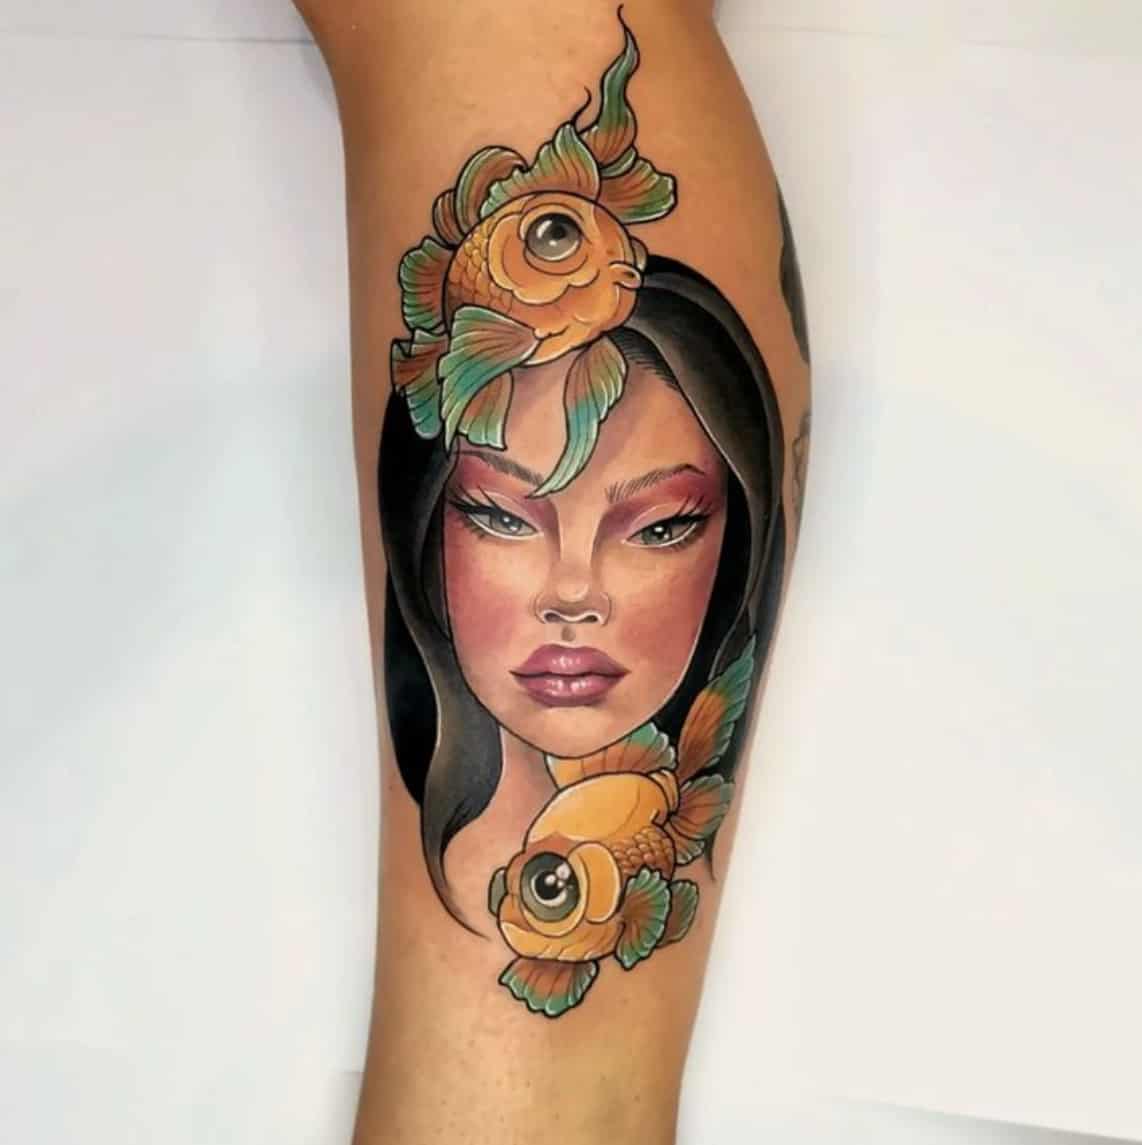 135 Thigh Tattoos for Women Adorning Your Legs with Intricate Designs   Psycho Tats